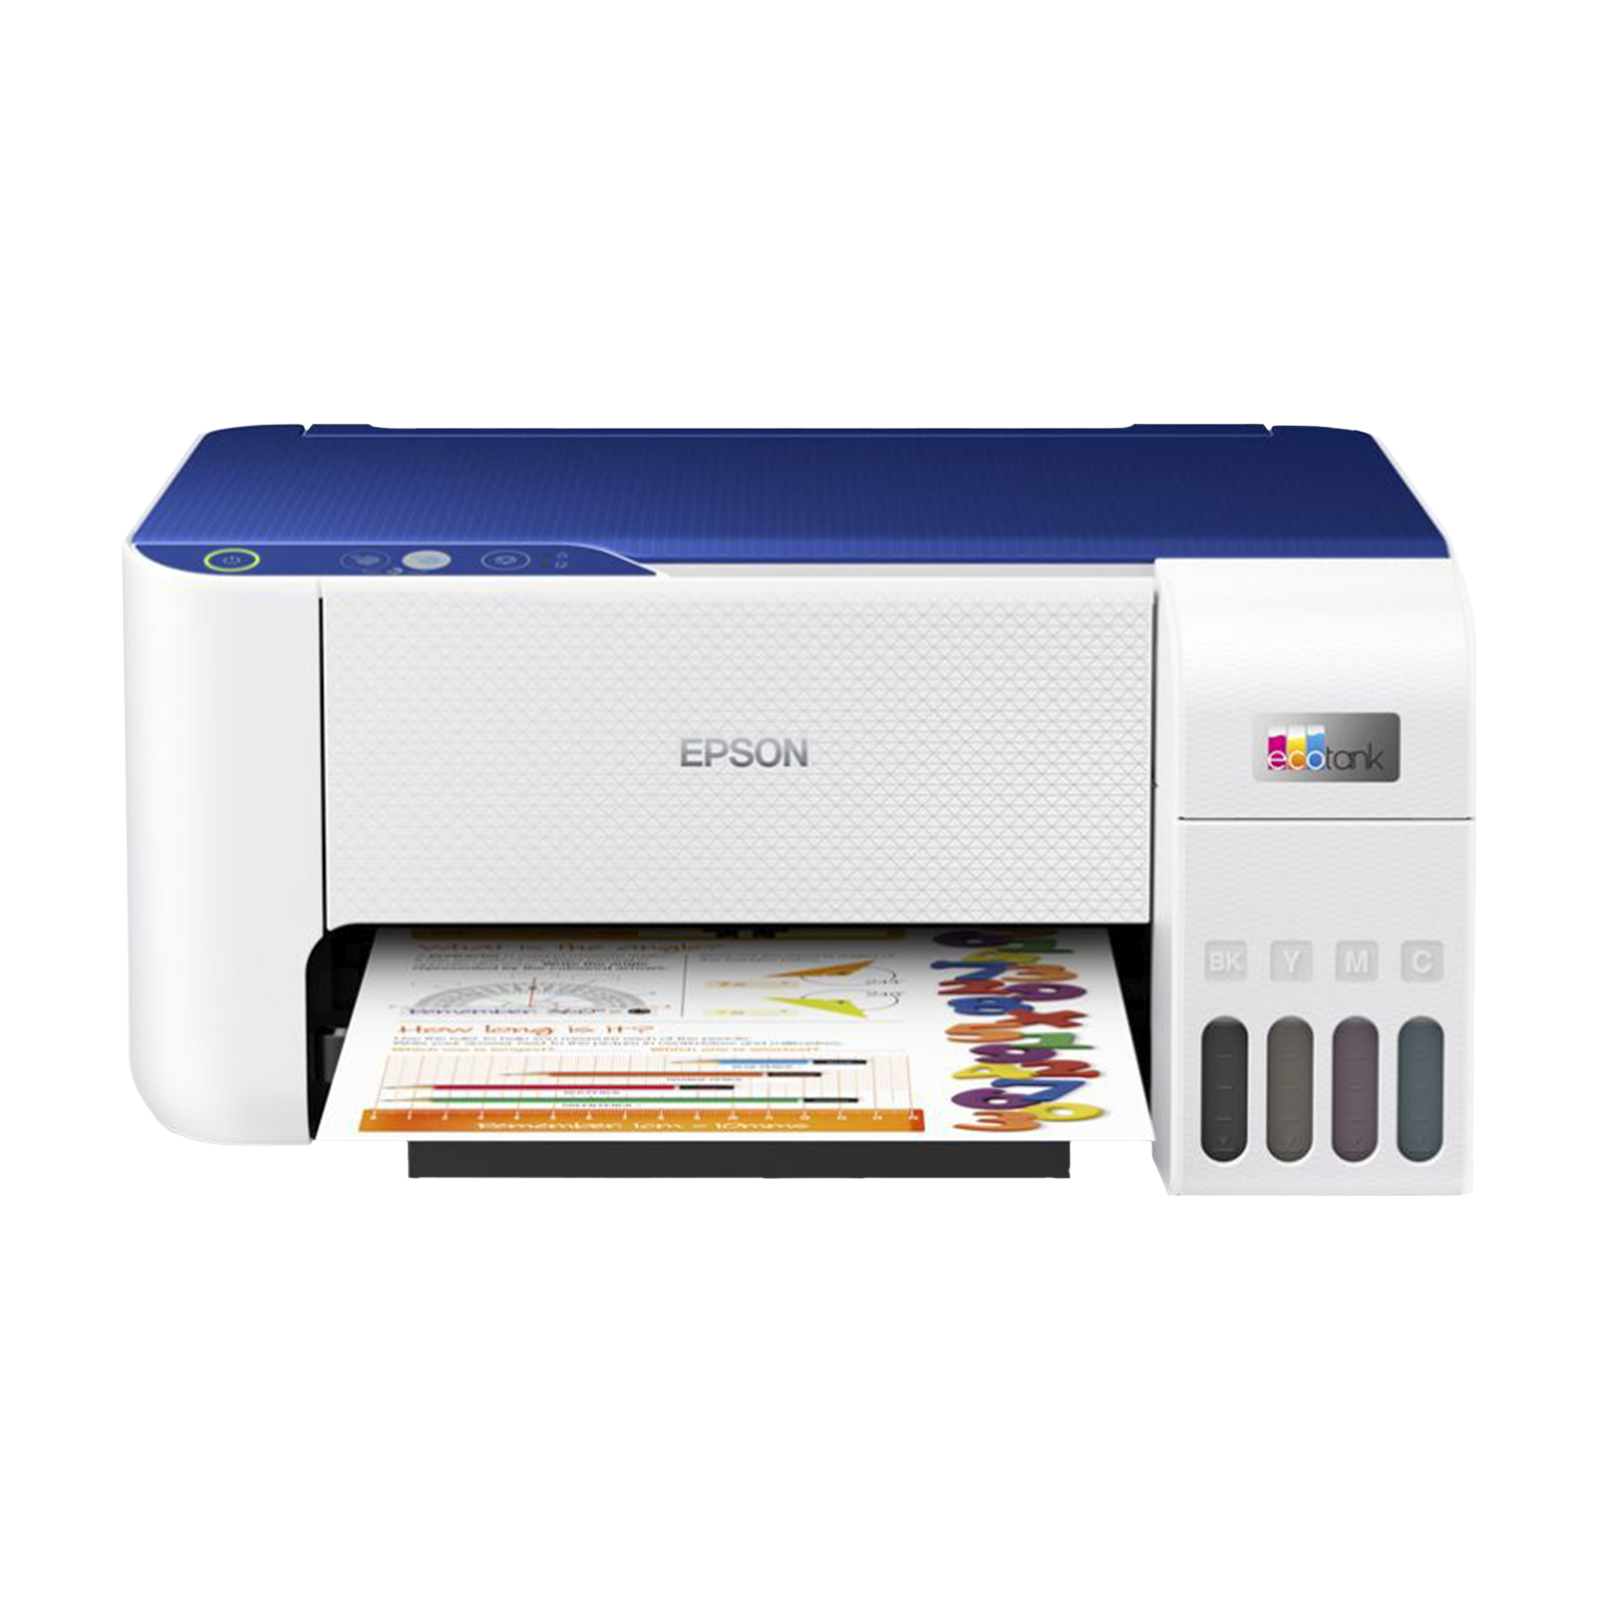 EPSON EcoTank L3255 Wireless Color All-in-One Ink Tank Printer (Flat Bed Scanner, C11CJ67512, White & Blue)